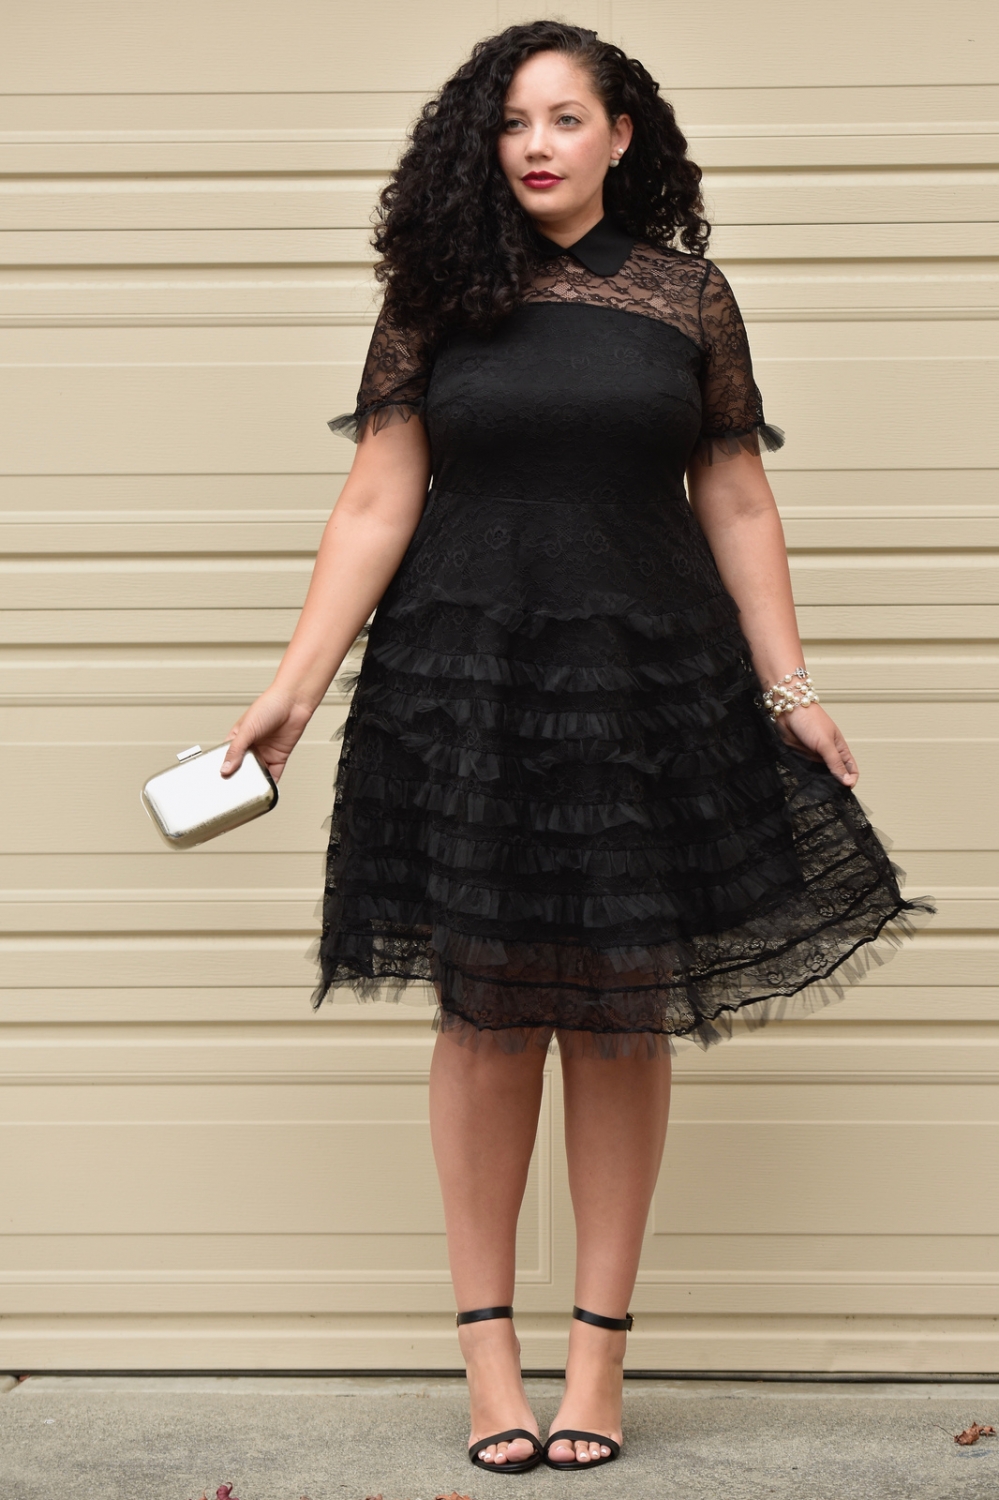 New Year's Eve Dress + $1,000 GIVEAWAY